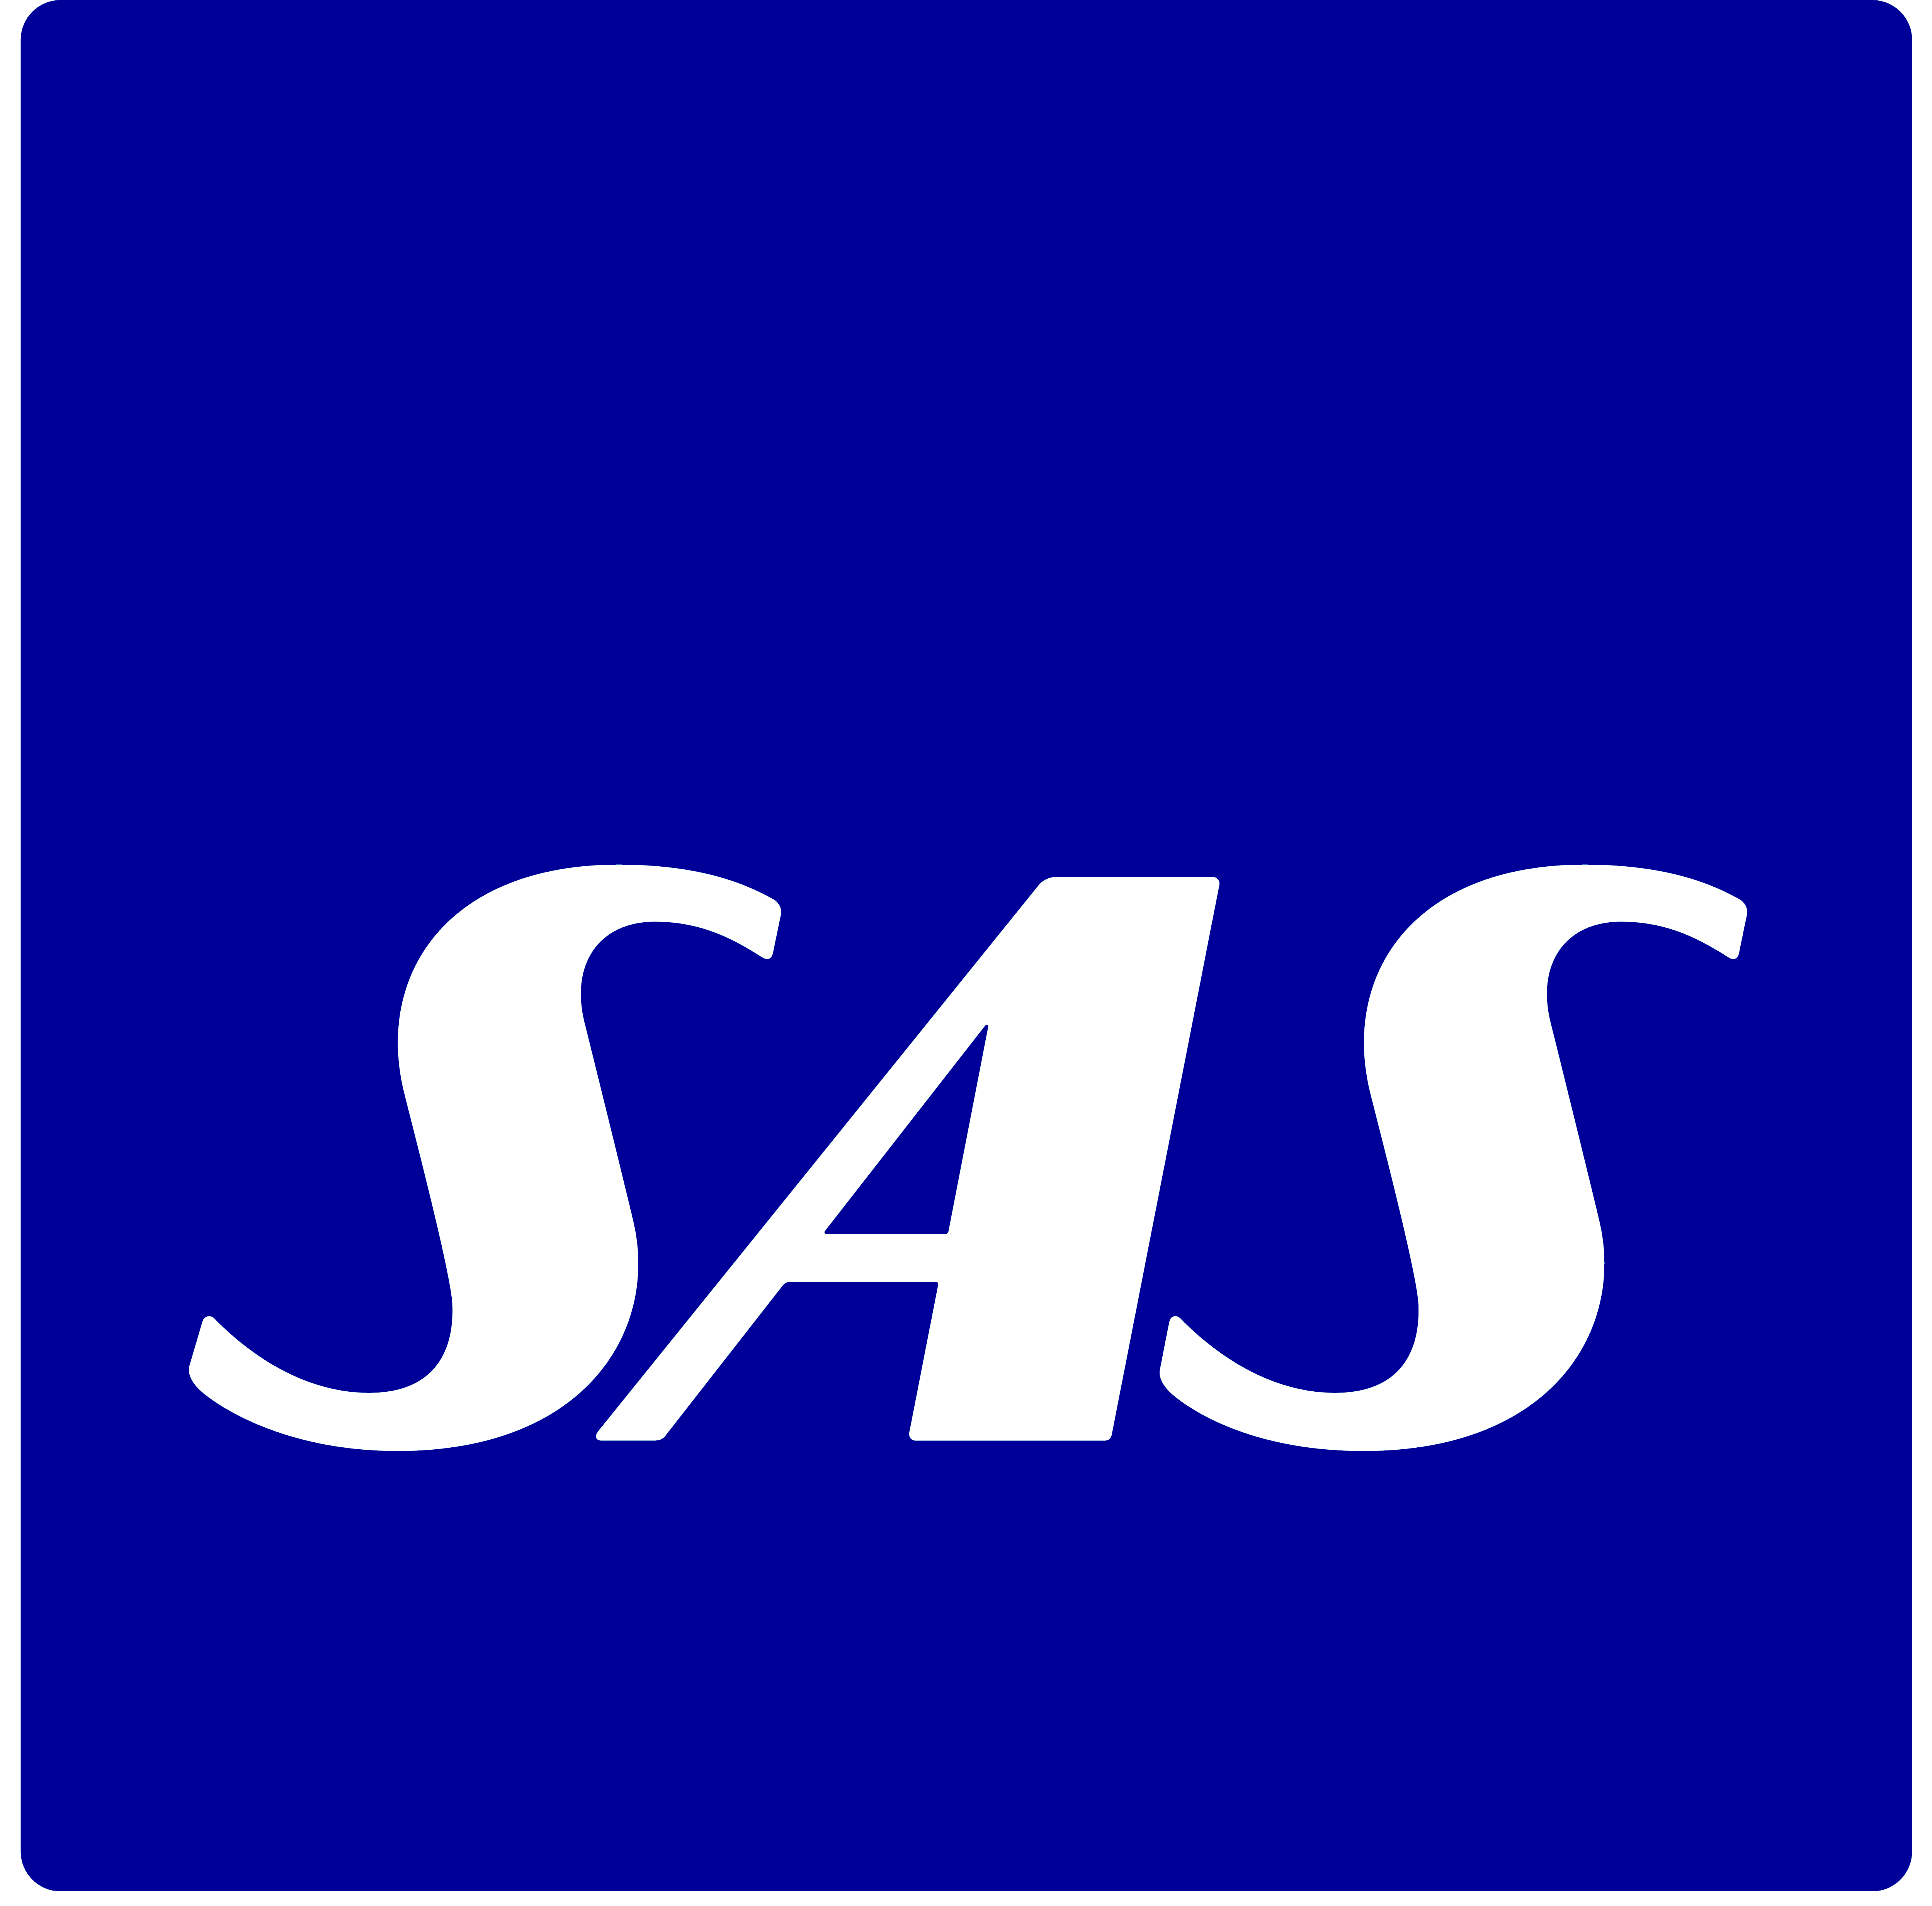 Scandinavian Airlines System (Investments)